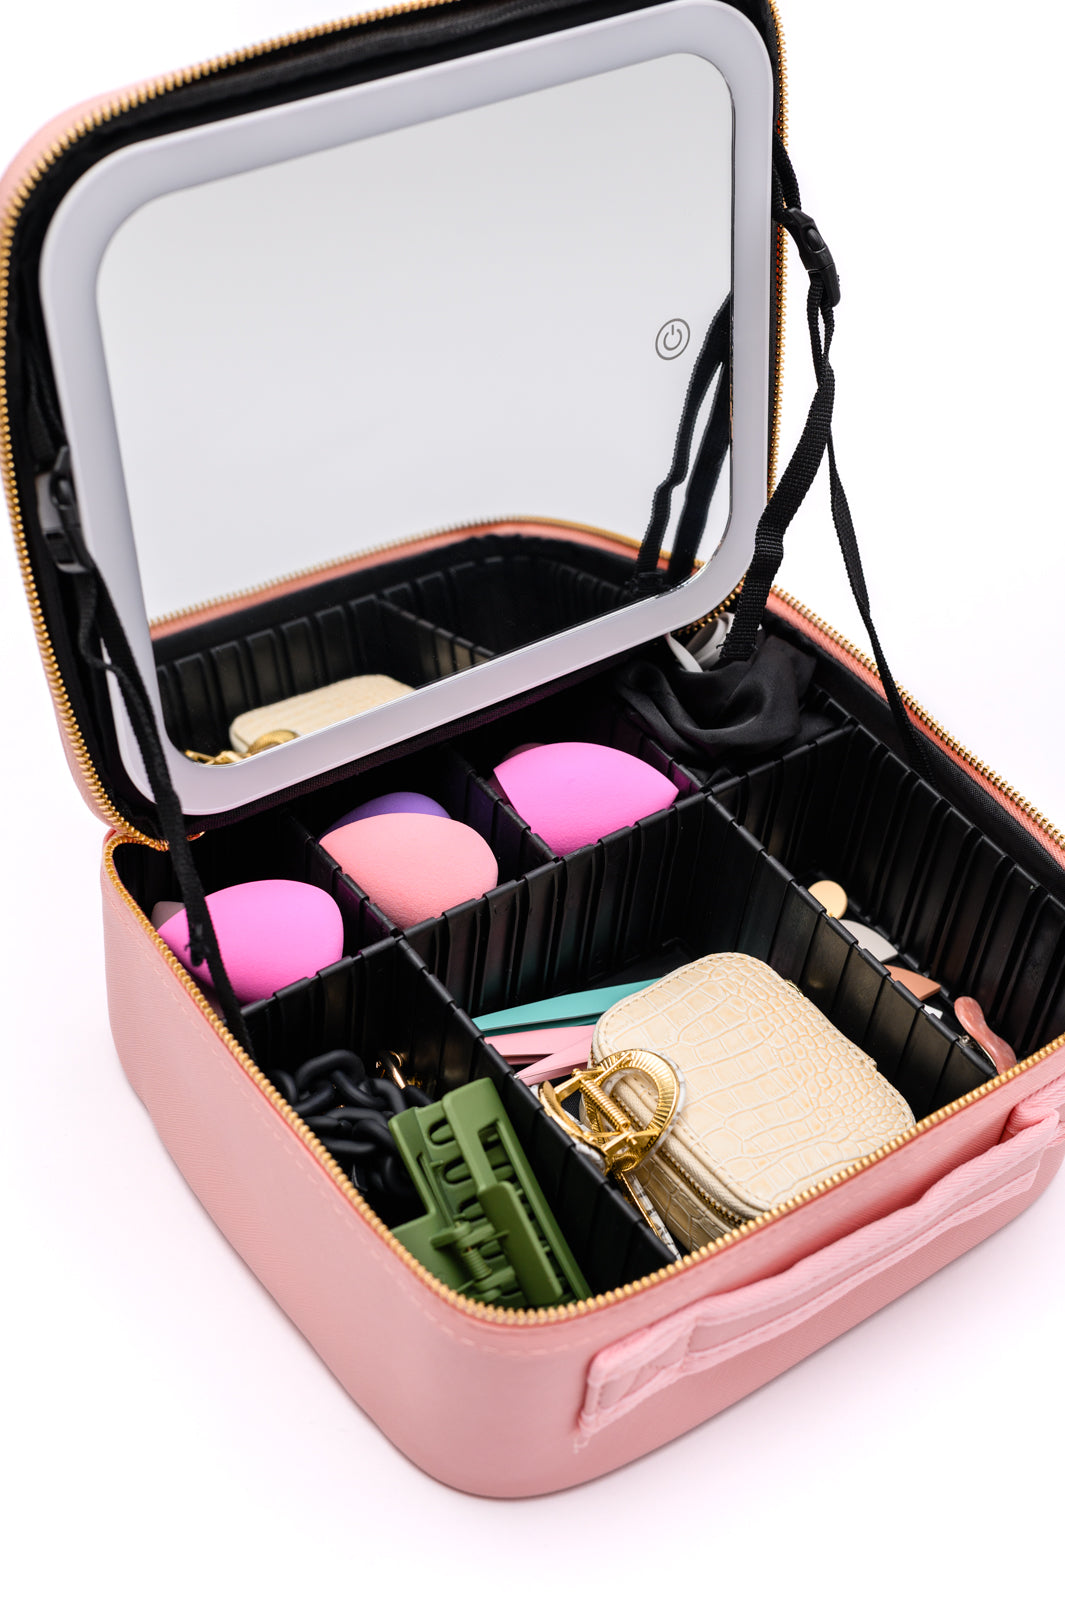 She's All That LED Makeup Case in Pink - Three Bears Boutique